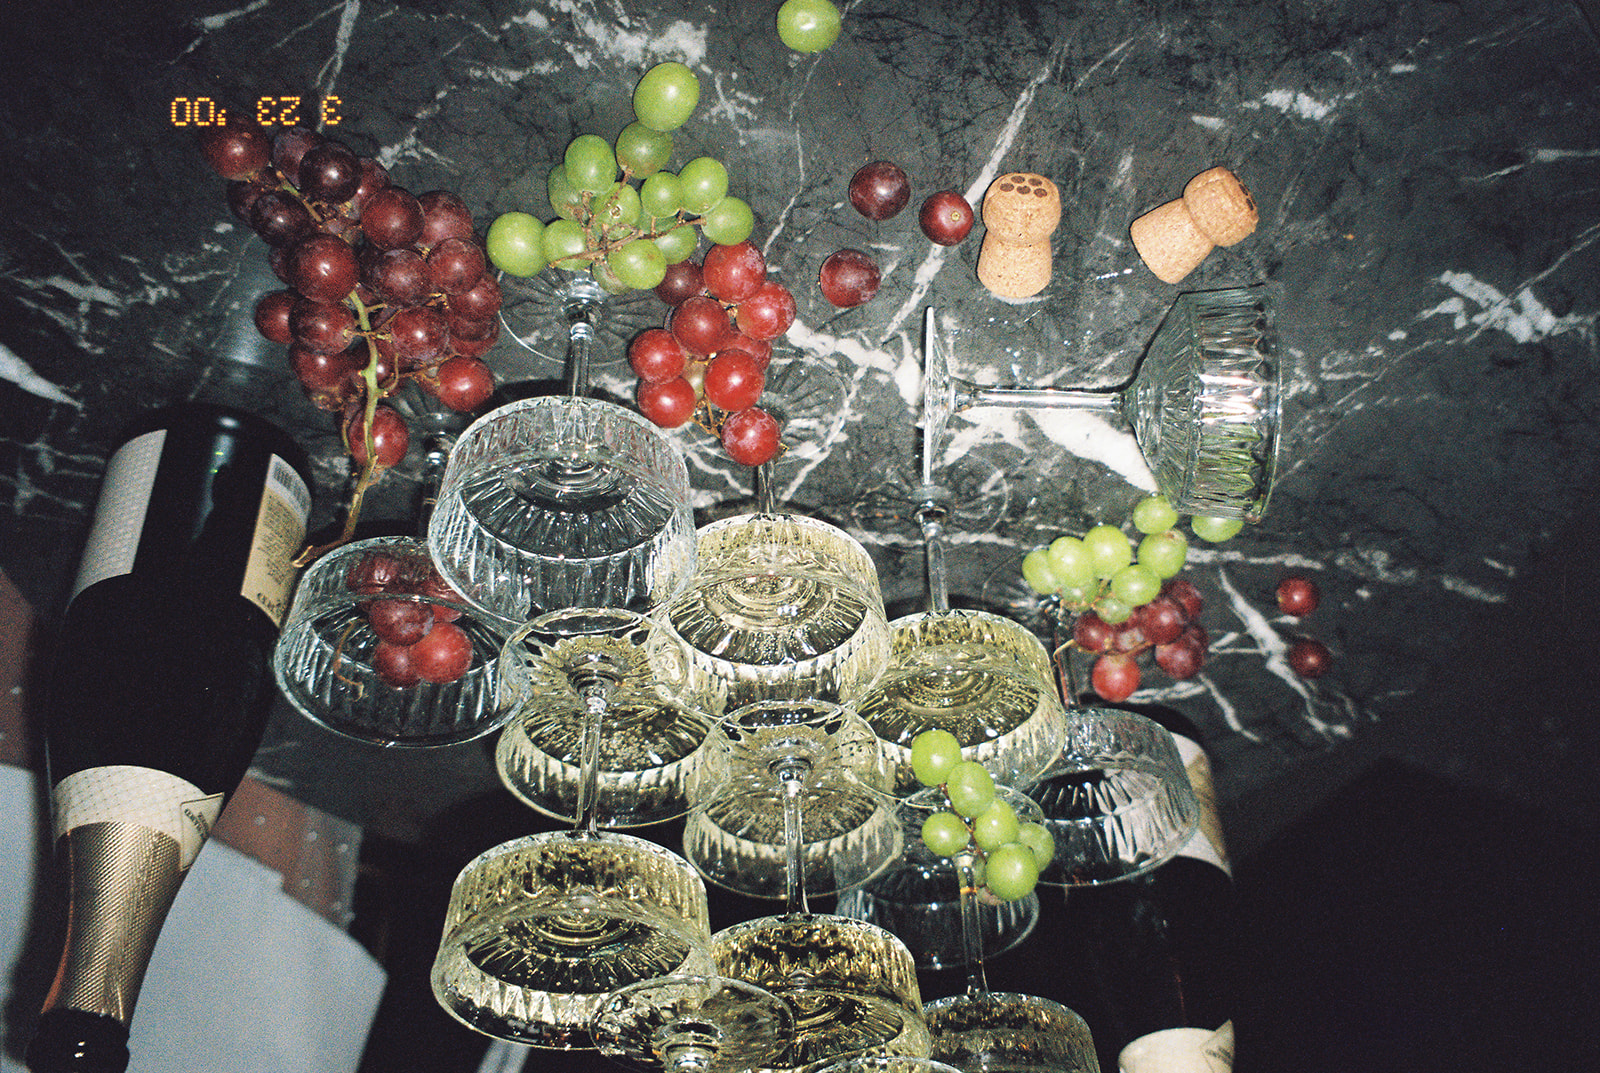 A champagne glass tower on a table decorated with grapes at a speakeasy wedding.